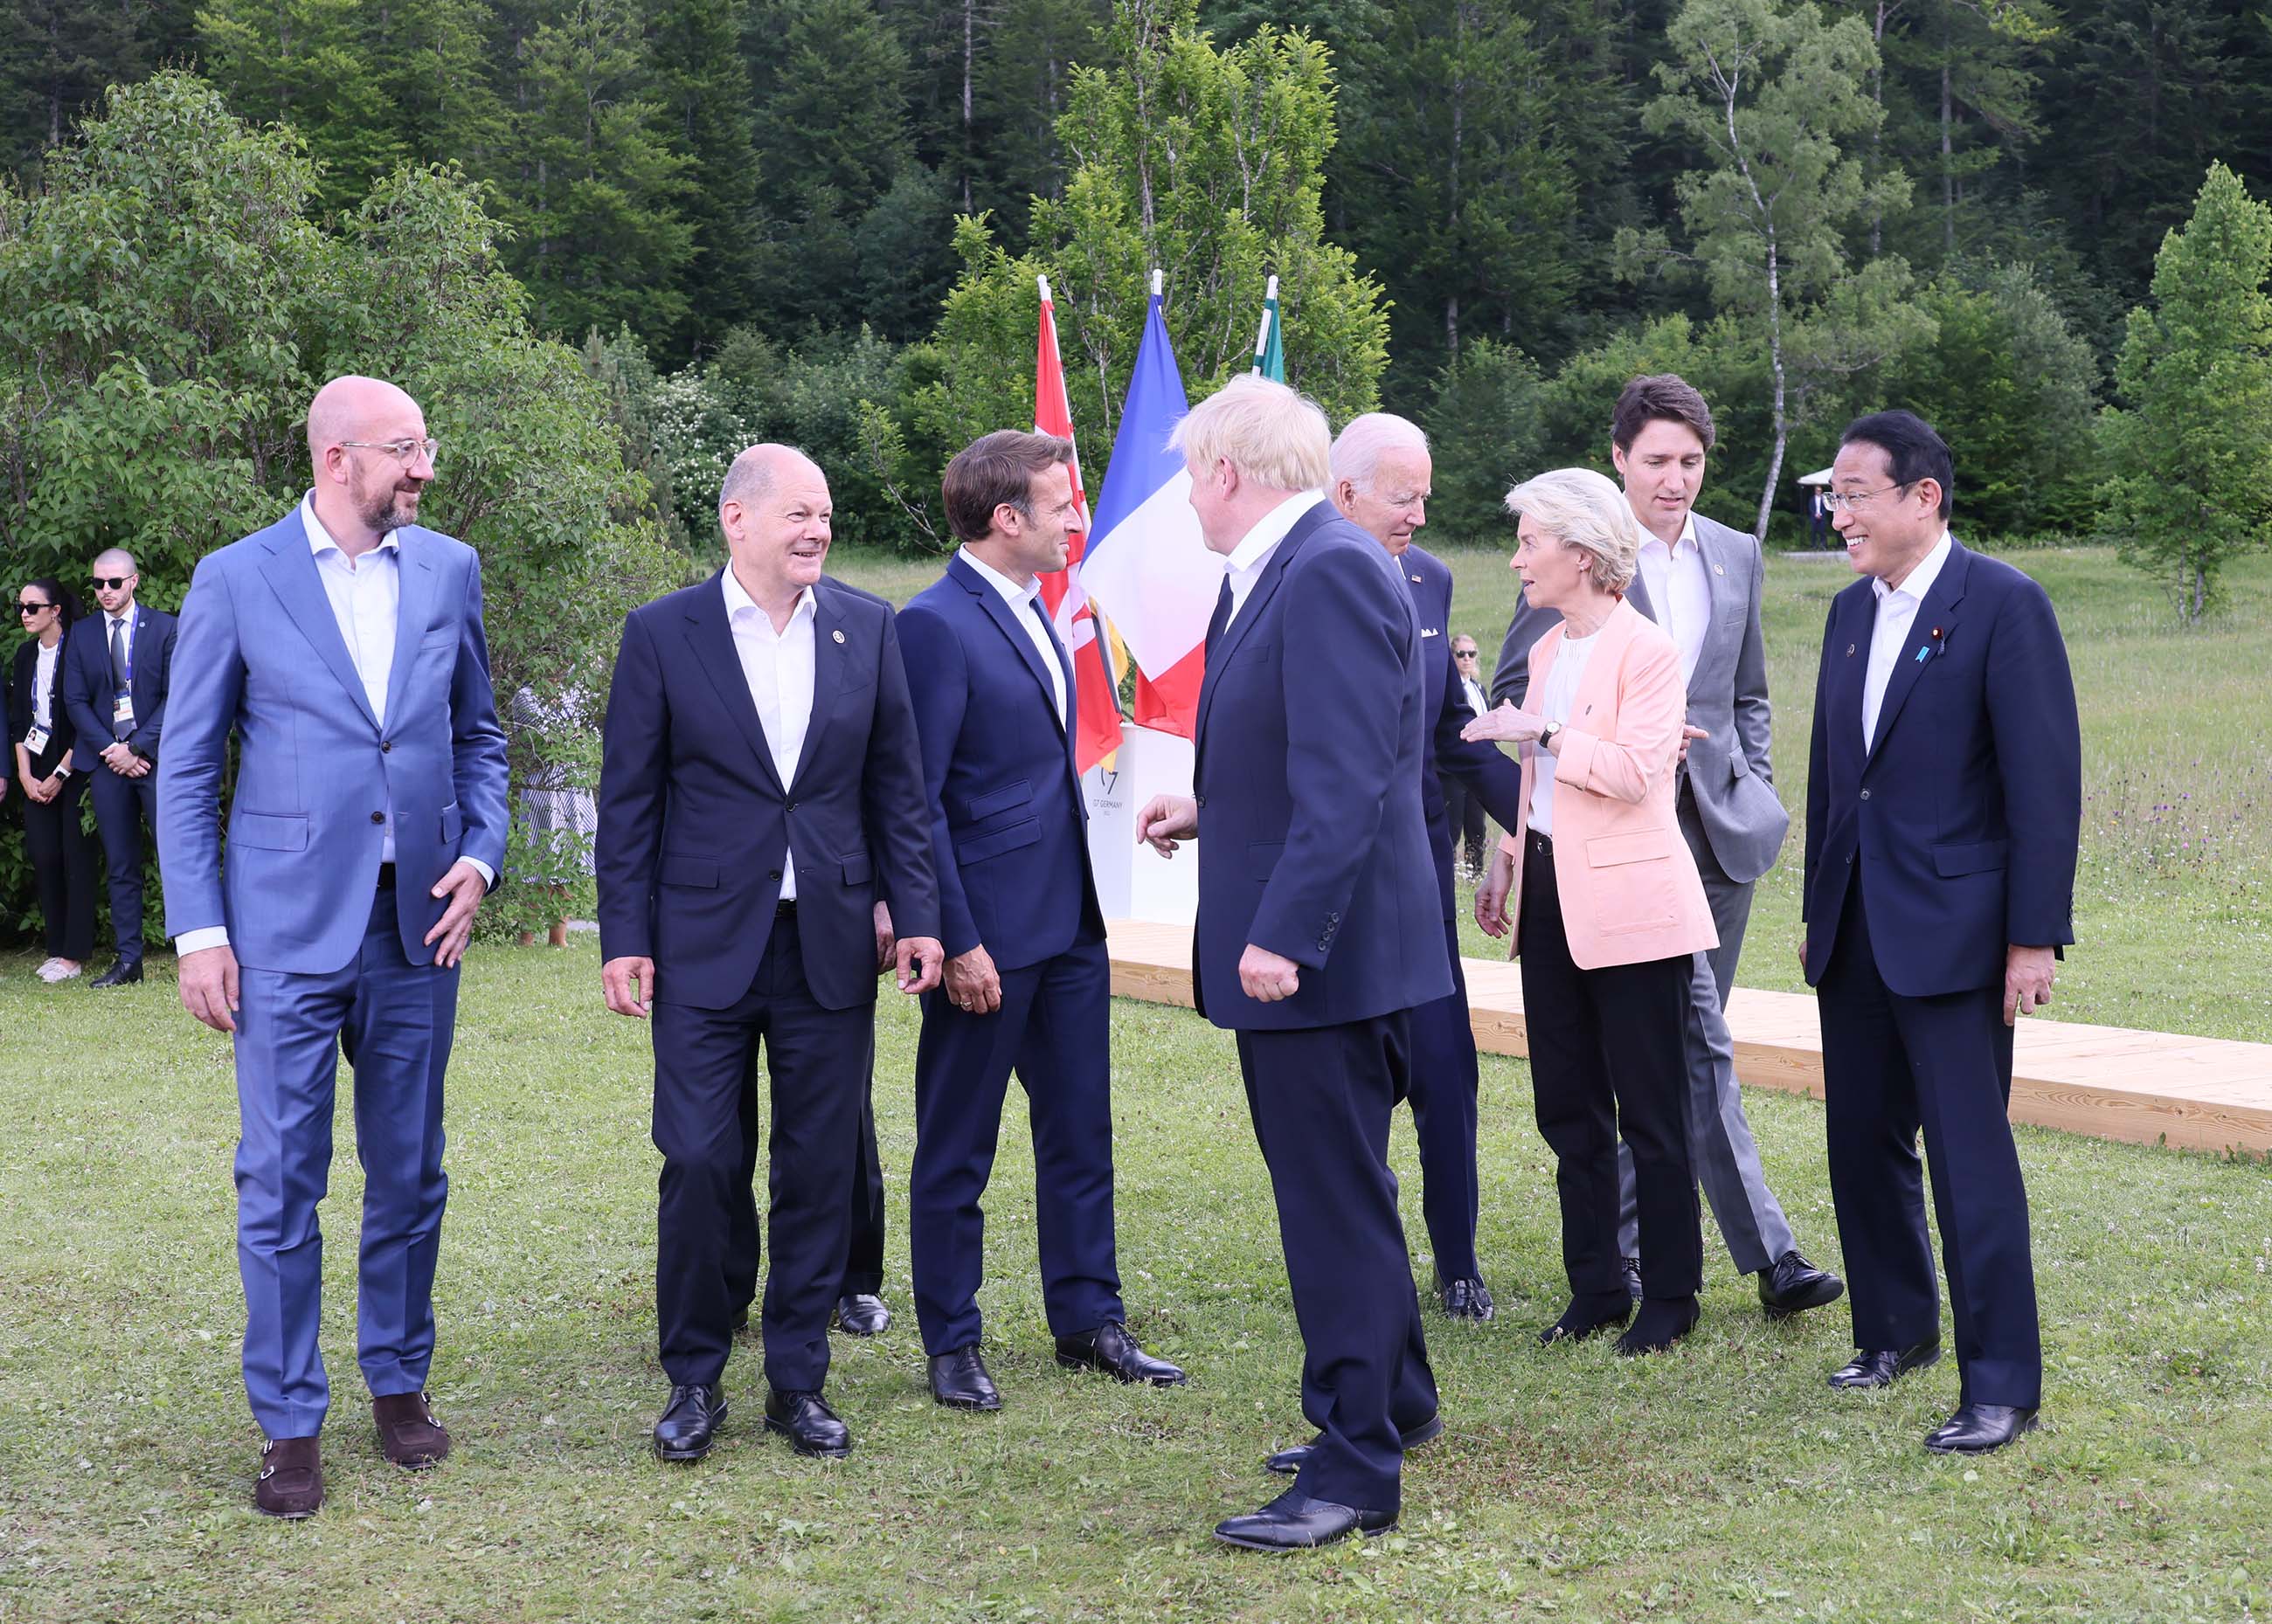 Photograph of a group photo session with the G7 leaders (2)